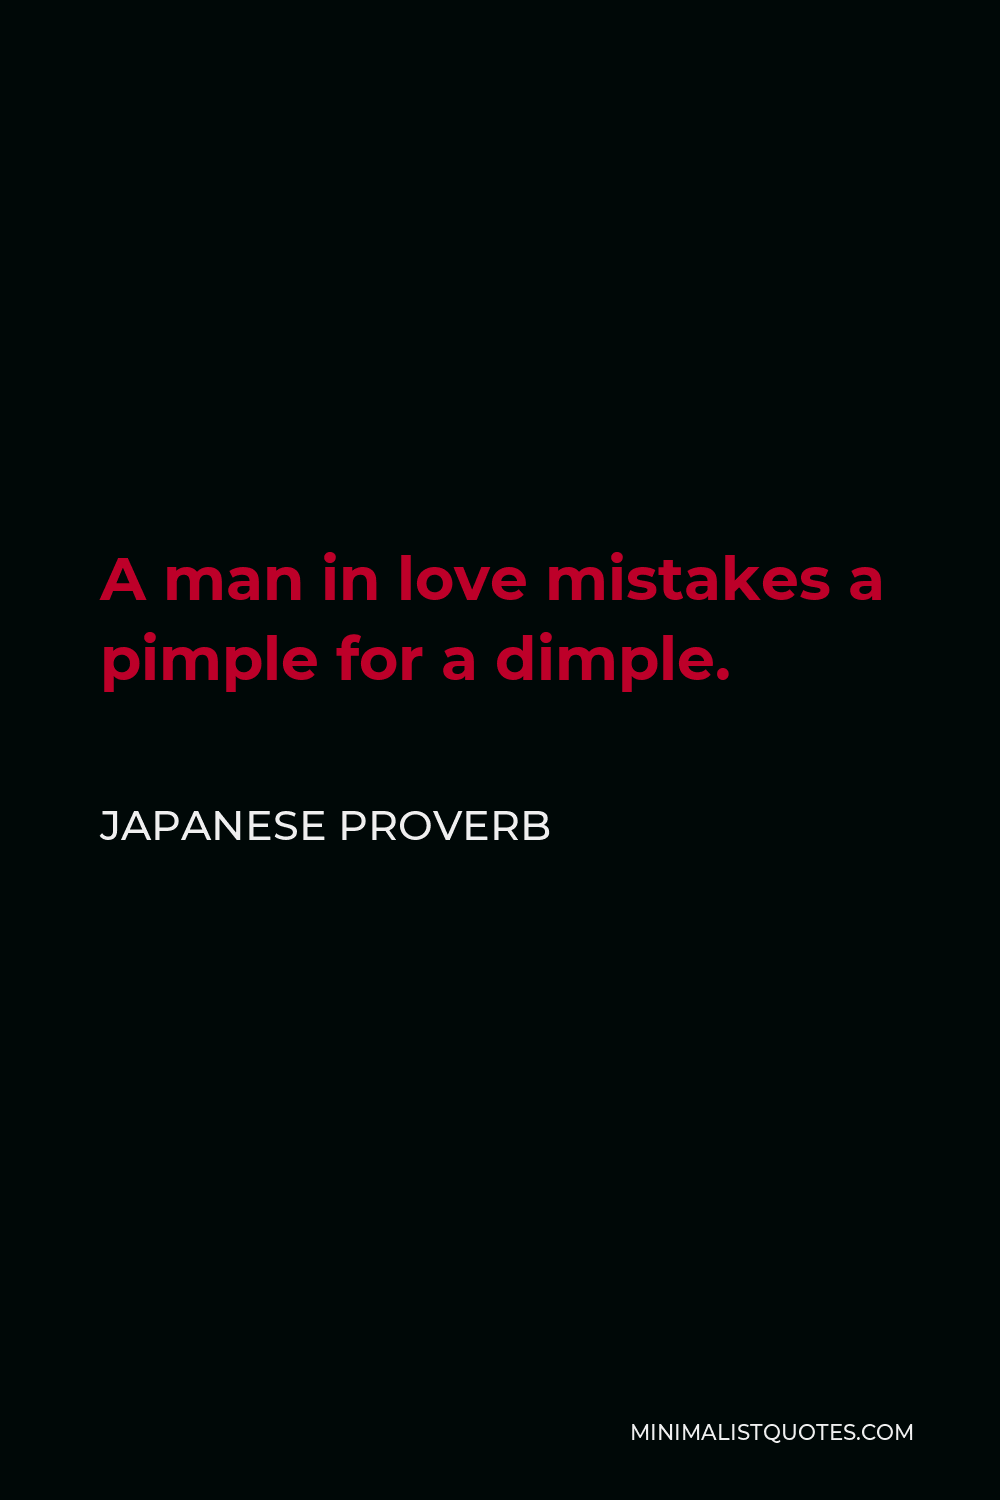 Japanese Proverb Quote - A man in love mistakes a pimple for a dimple.